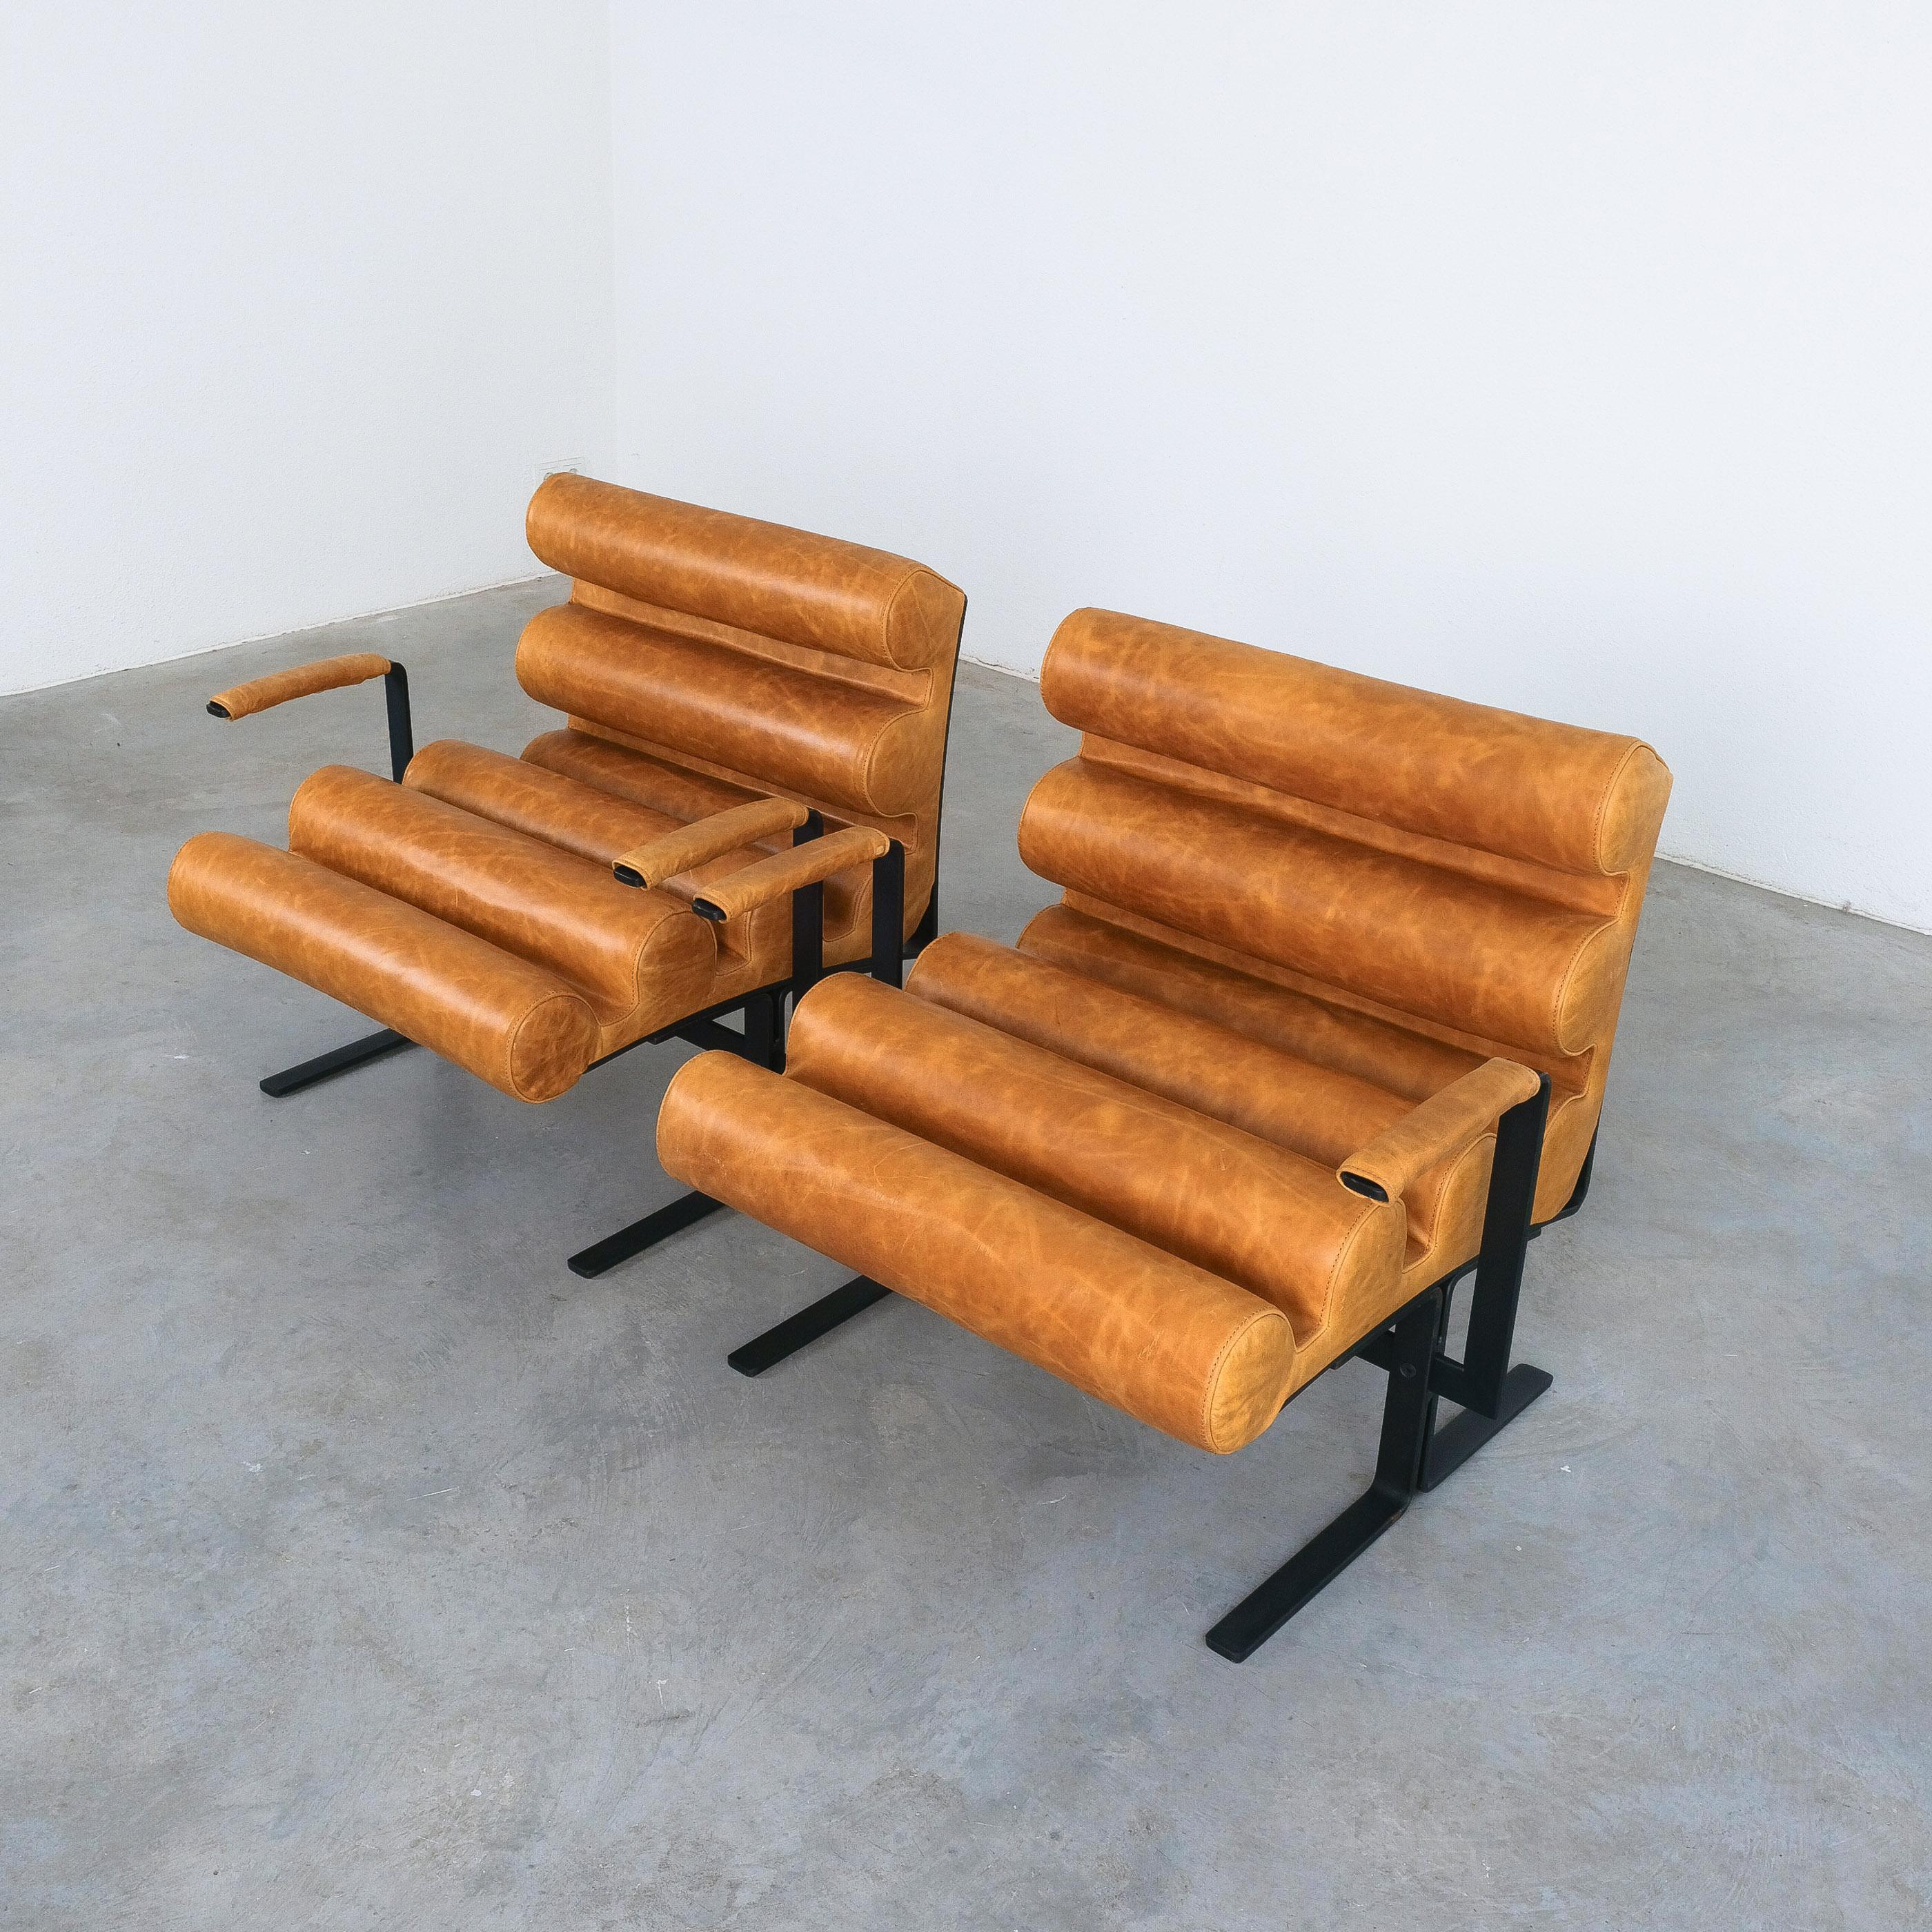 Joe Colombo For Sormani Roll Brown Leather Spring Steel Armchair Pair (2) , 1962 For Sale 1